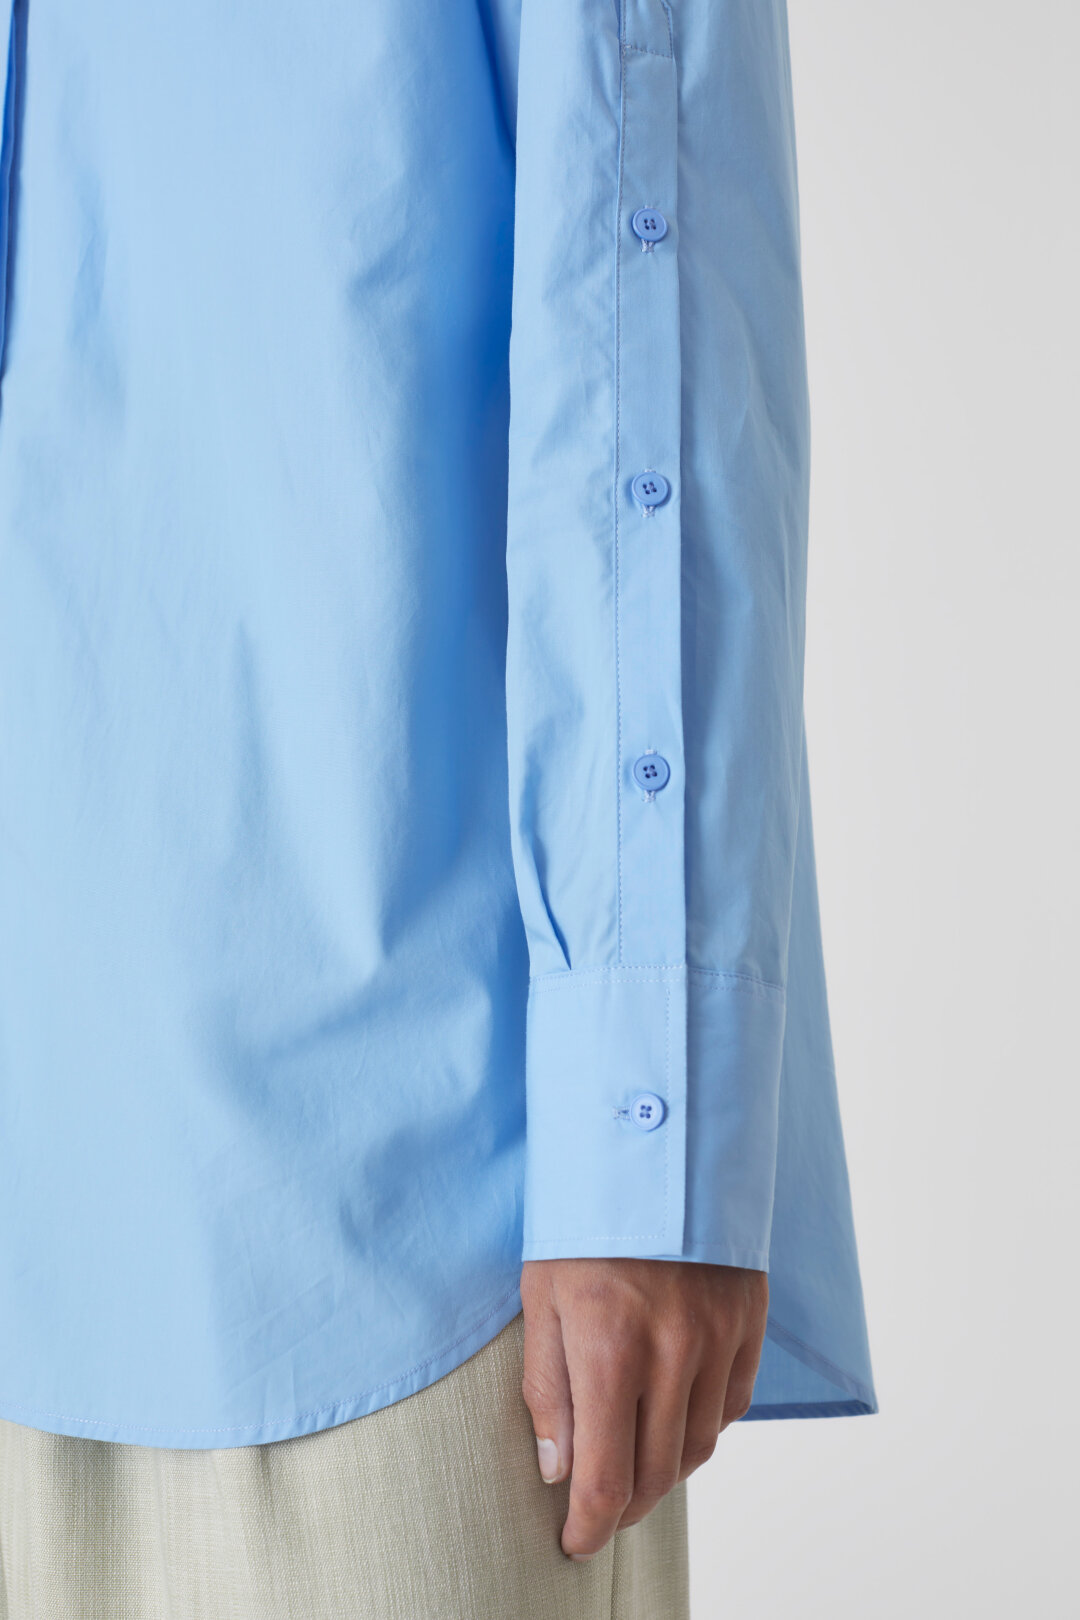 CLOSED Placket Detail Shirt in Blue Morning Sky